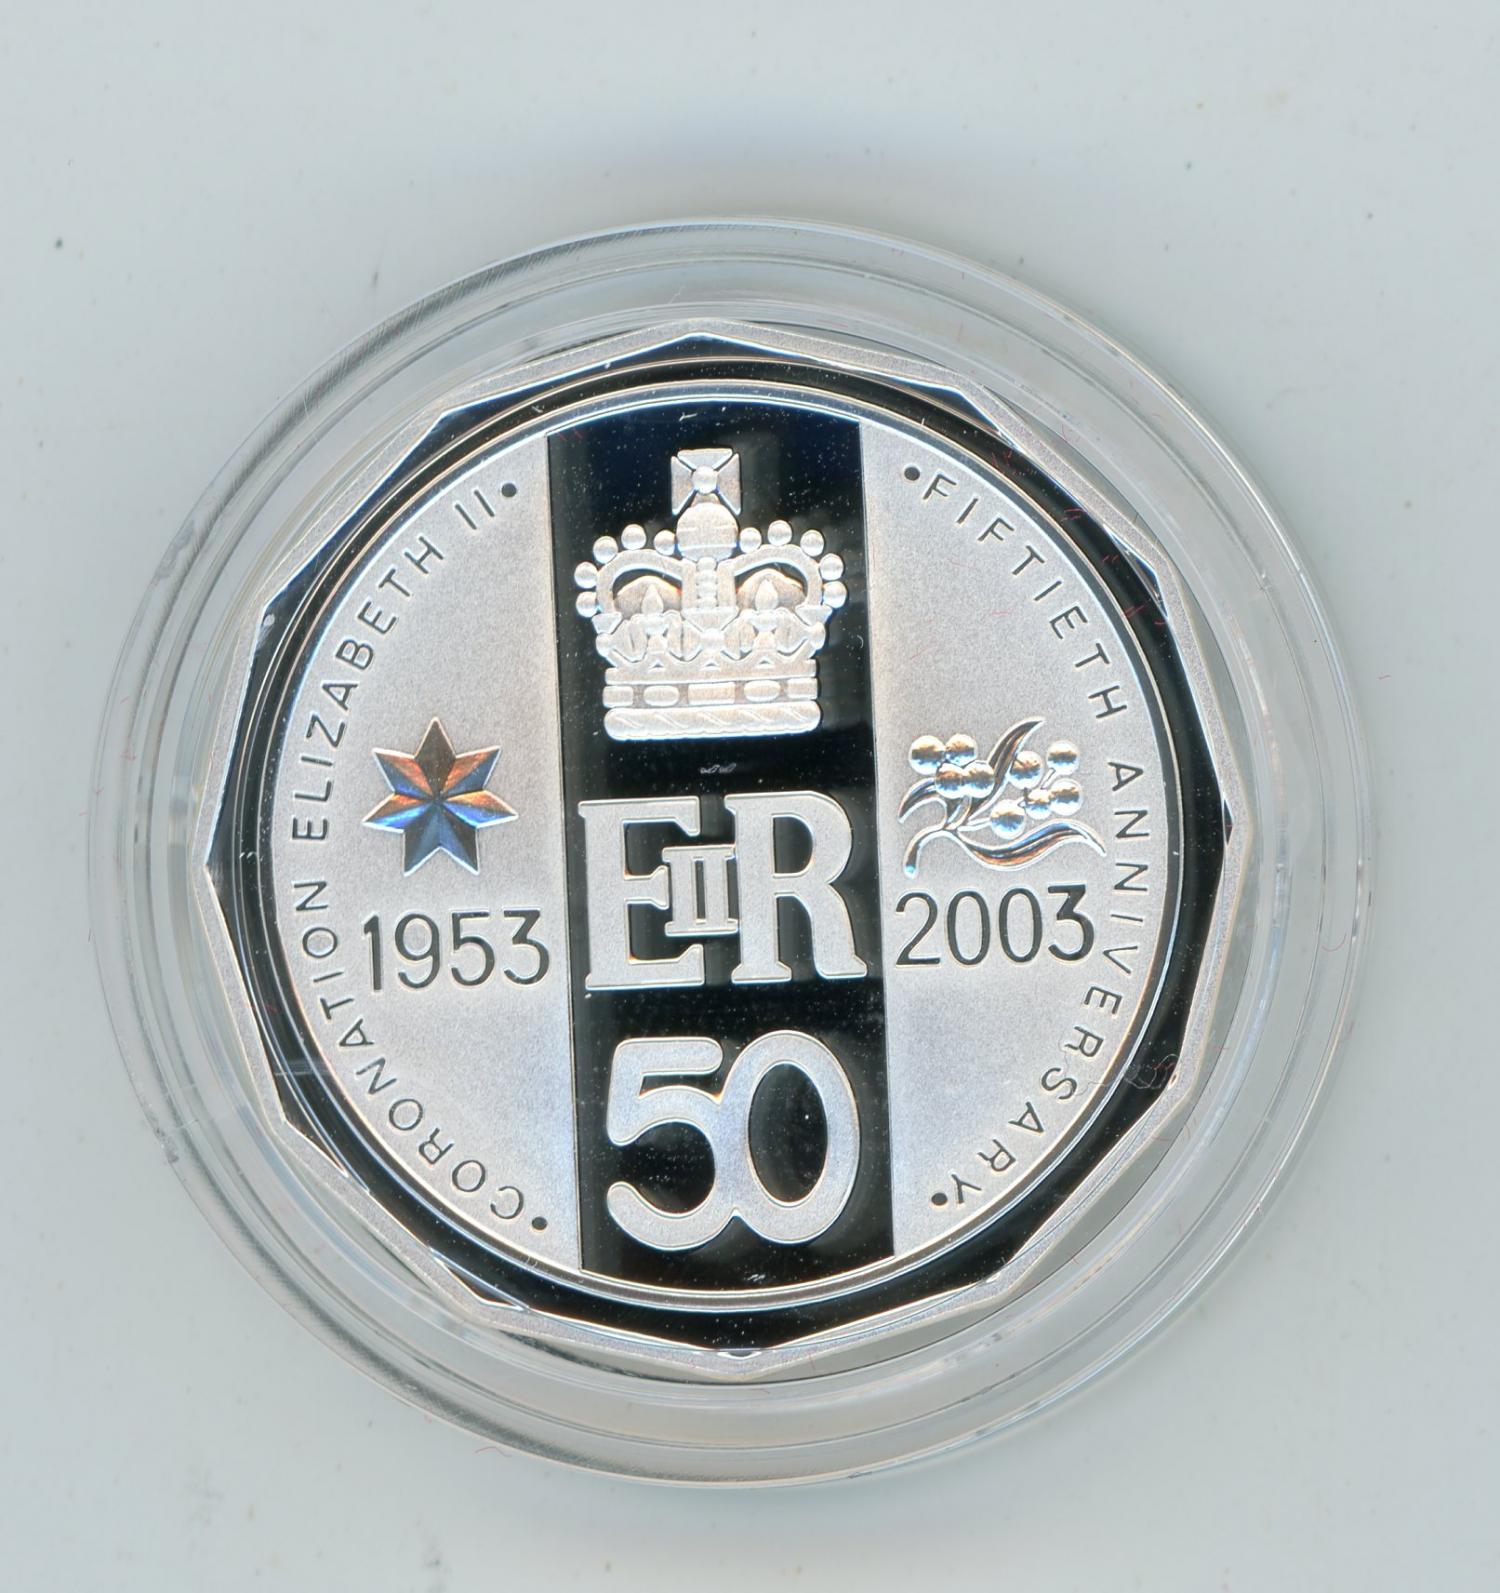 Thumbnail for 2003 50th Anniversary Coronation of Queen Elizabeth II Silver Proof Coin in capsule only